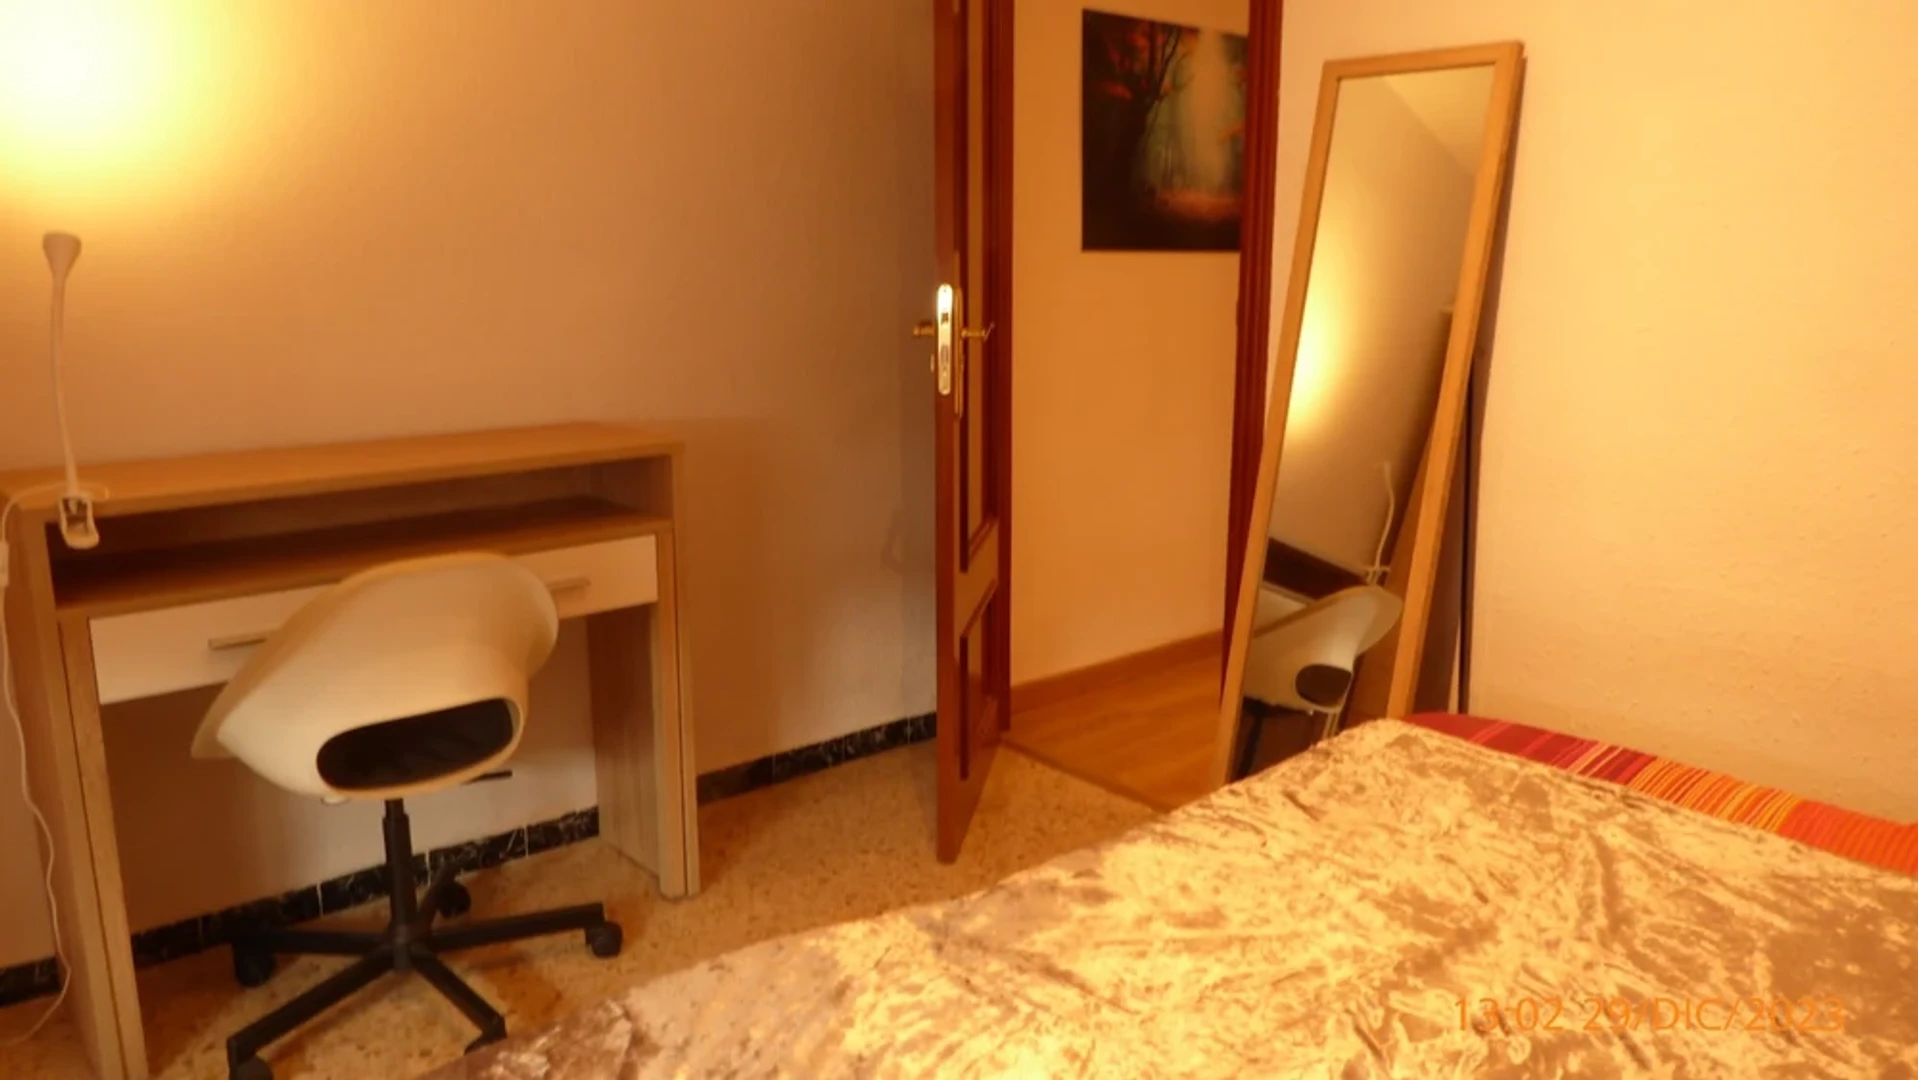 Room for rent with double bed Lleida